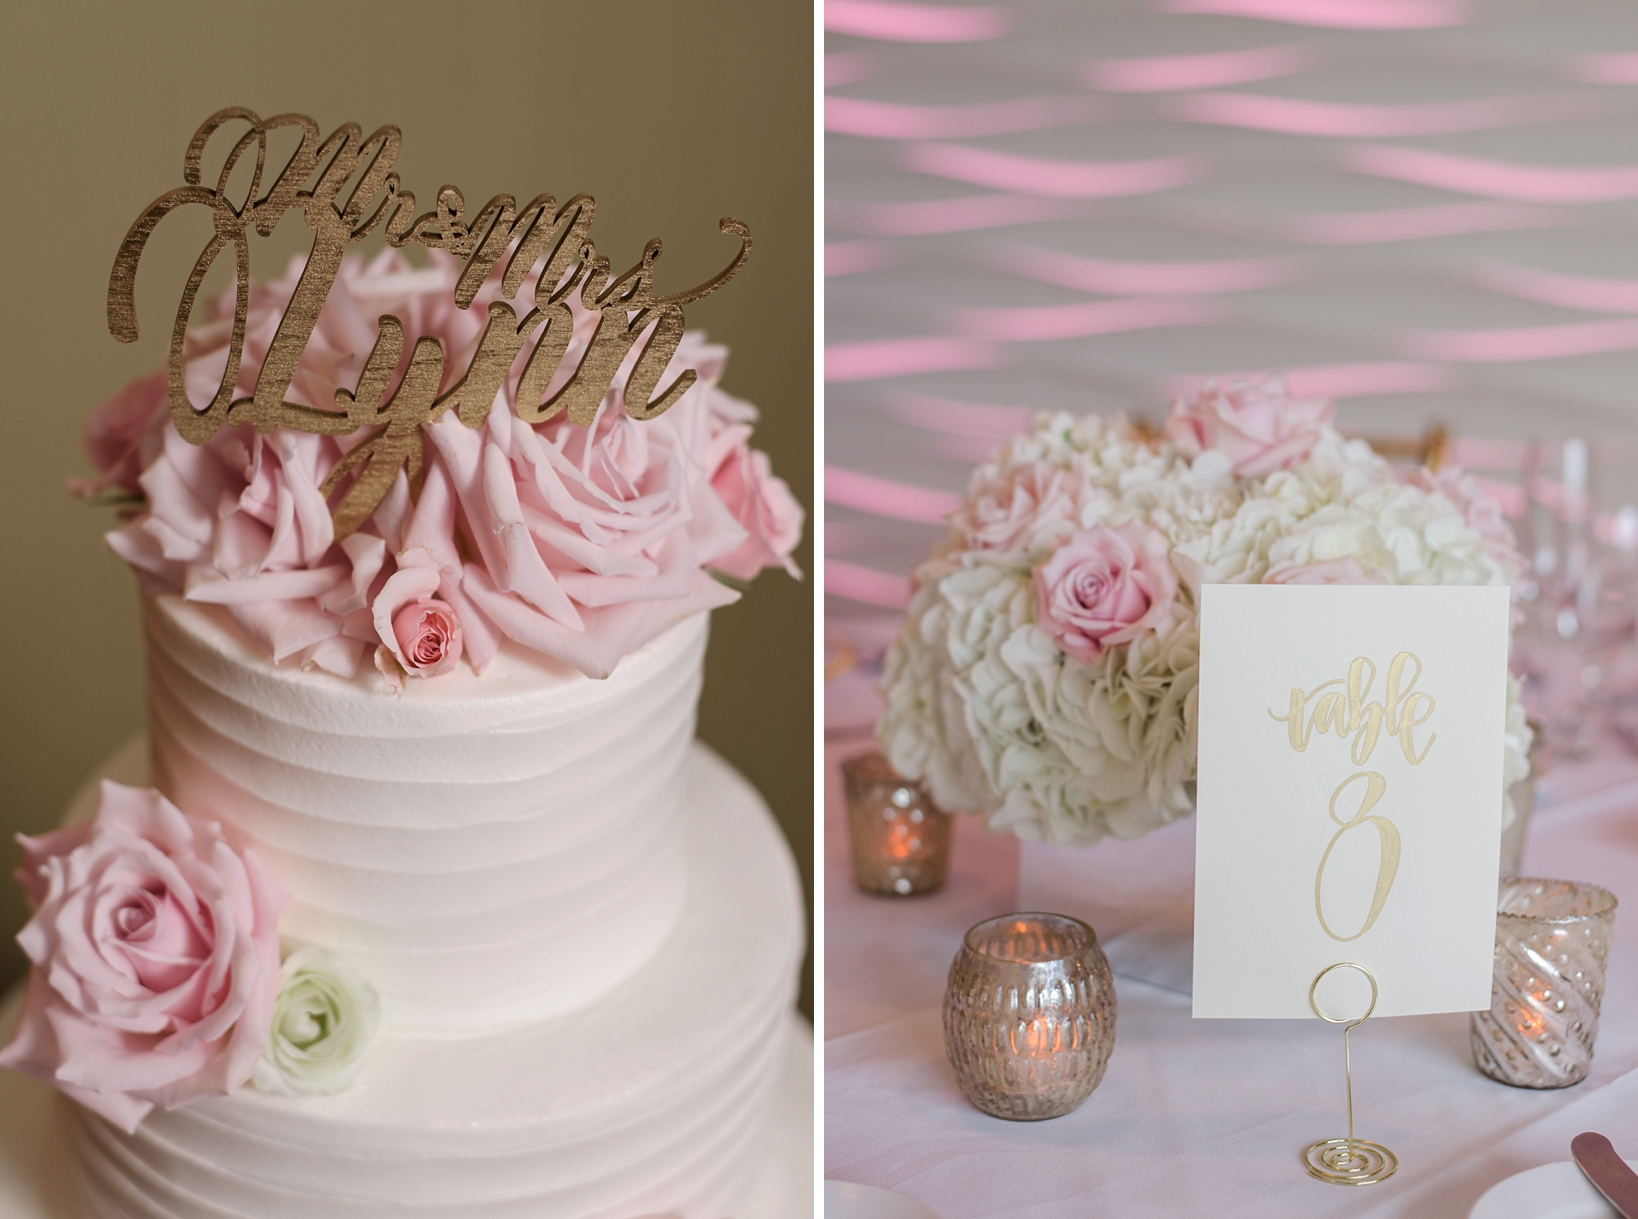 The cake topper and rose accents and a table number from the reception 